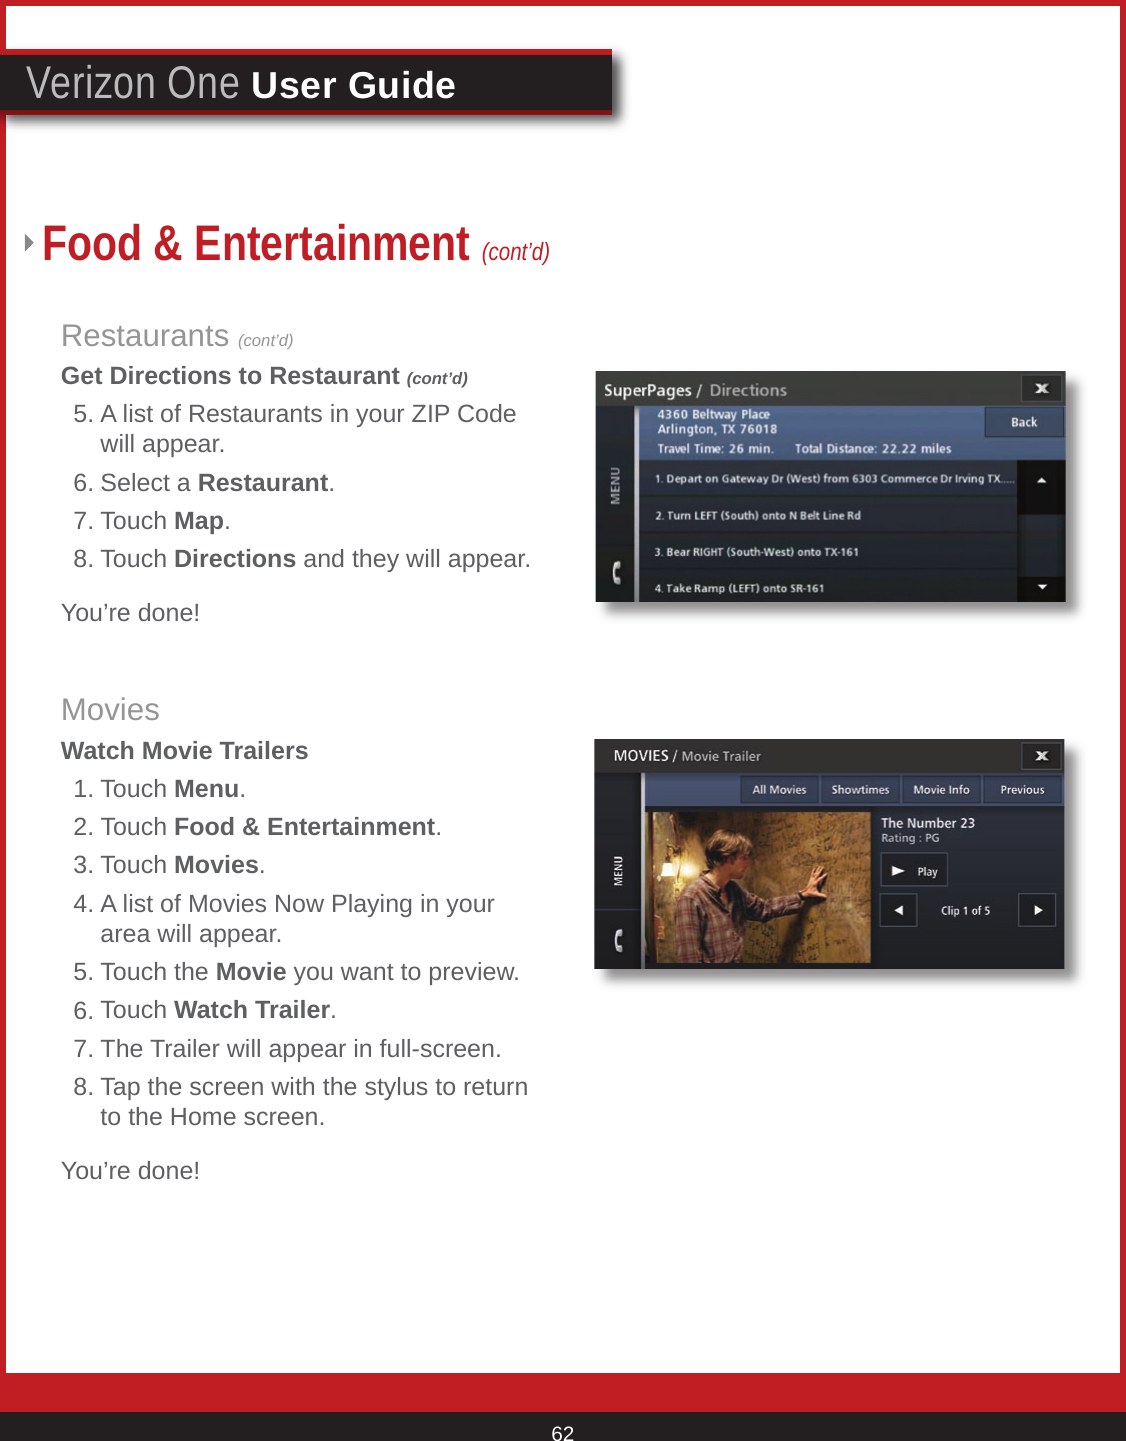 © 2007 Verizon. All Rights Reserved. 62Verizon One User GuideRestaurants (cont’d)Get Directions to Restaurant (cont’d)  5. A list of Restaurants in your ZIP Code      will appear.  6. Select a Restaurant.  7. Touch Map.  8. Touch Directions and they will appear.You’re done!MoviesWatch Movie Trailers  1. Touch Menu.  2. Touch Food &amp; Entertainment. 3. Touch Movies.  4. A list of Movies Now Playing in your      area will appear.  5. Touch the Movie you want to preview.  6. Touch Watch Trailer.  7. The Trailer will appear in full-screen.  8. Tap the screen with the stylus to return      to the Home screen.You’re done!Food &amp; Entertainment (cont’d)